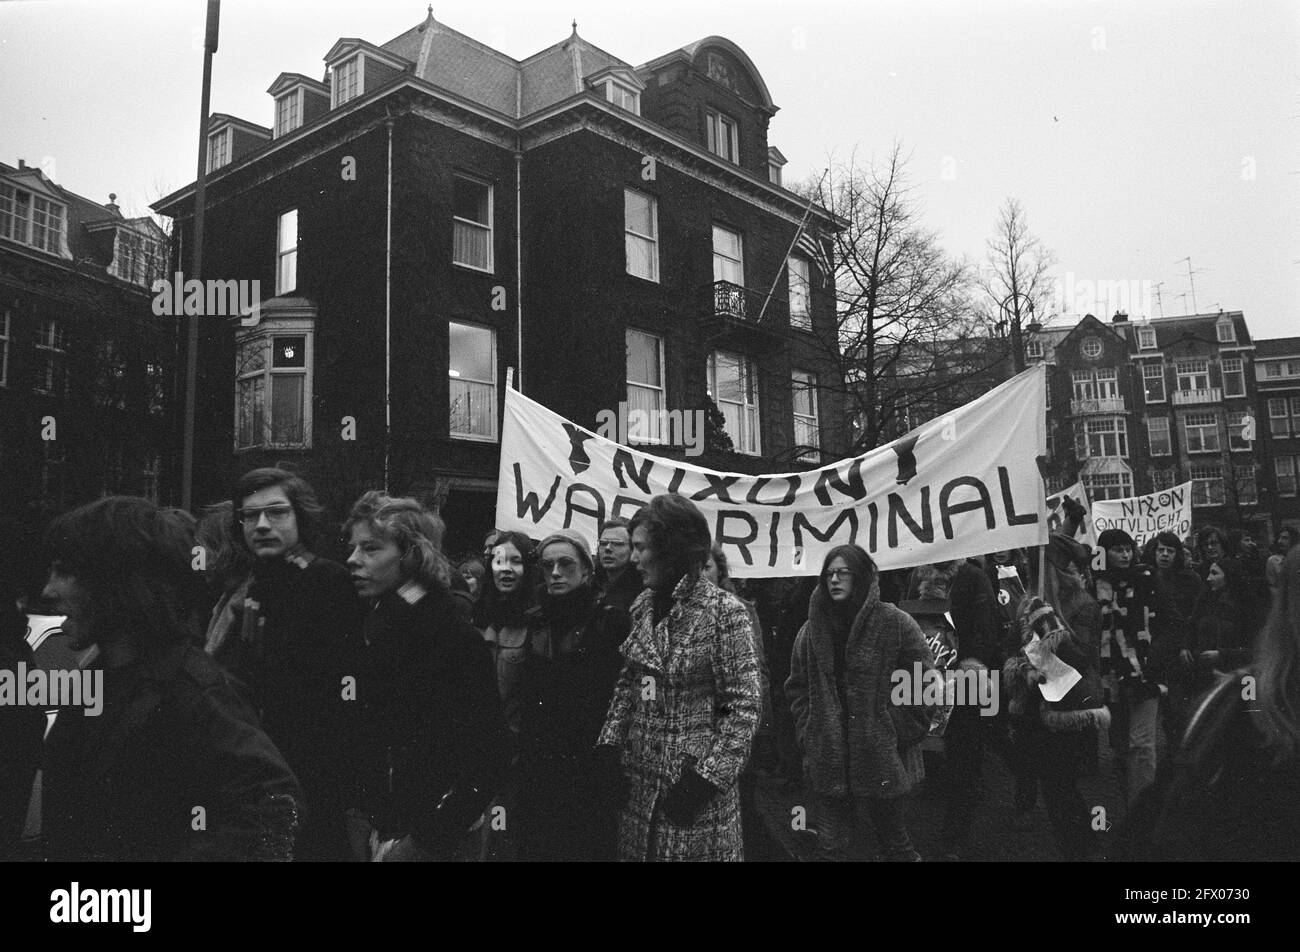 Schoolchildren strike in Amsterdam to protest war in Vietnam, January 18, 1973, SCHOOLS, wars, protests, strikes, The Netherlands, 20th century press agency photo, news to remember, documentary, historic photography 1945-1990, visual stories, human history of the Twentieth Century, capturing moments in time Stock Photo